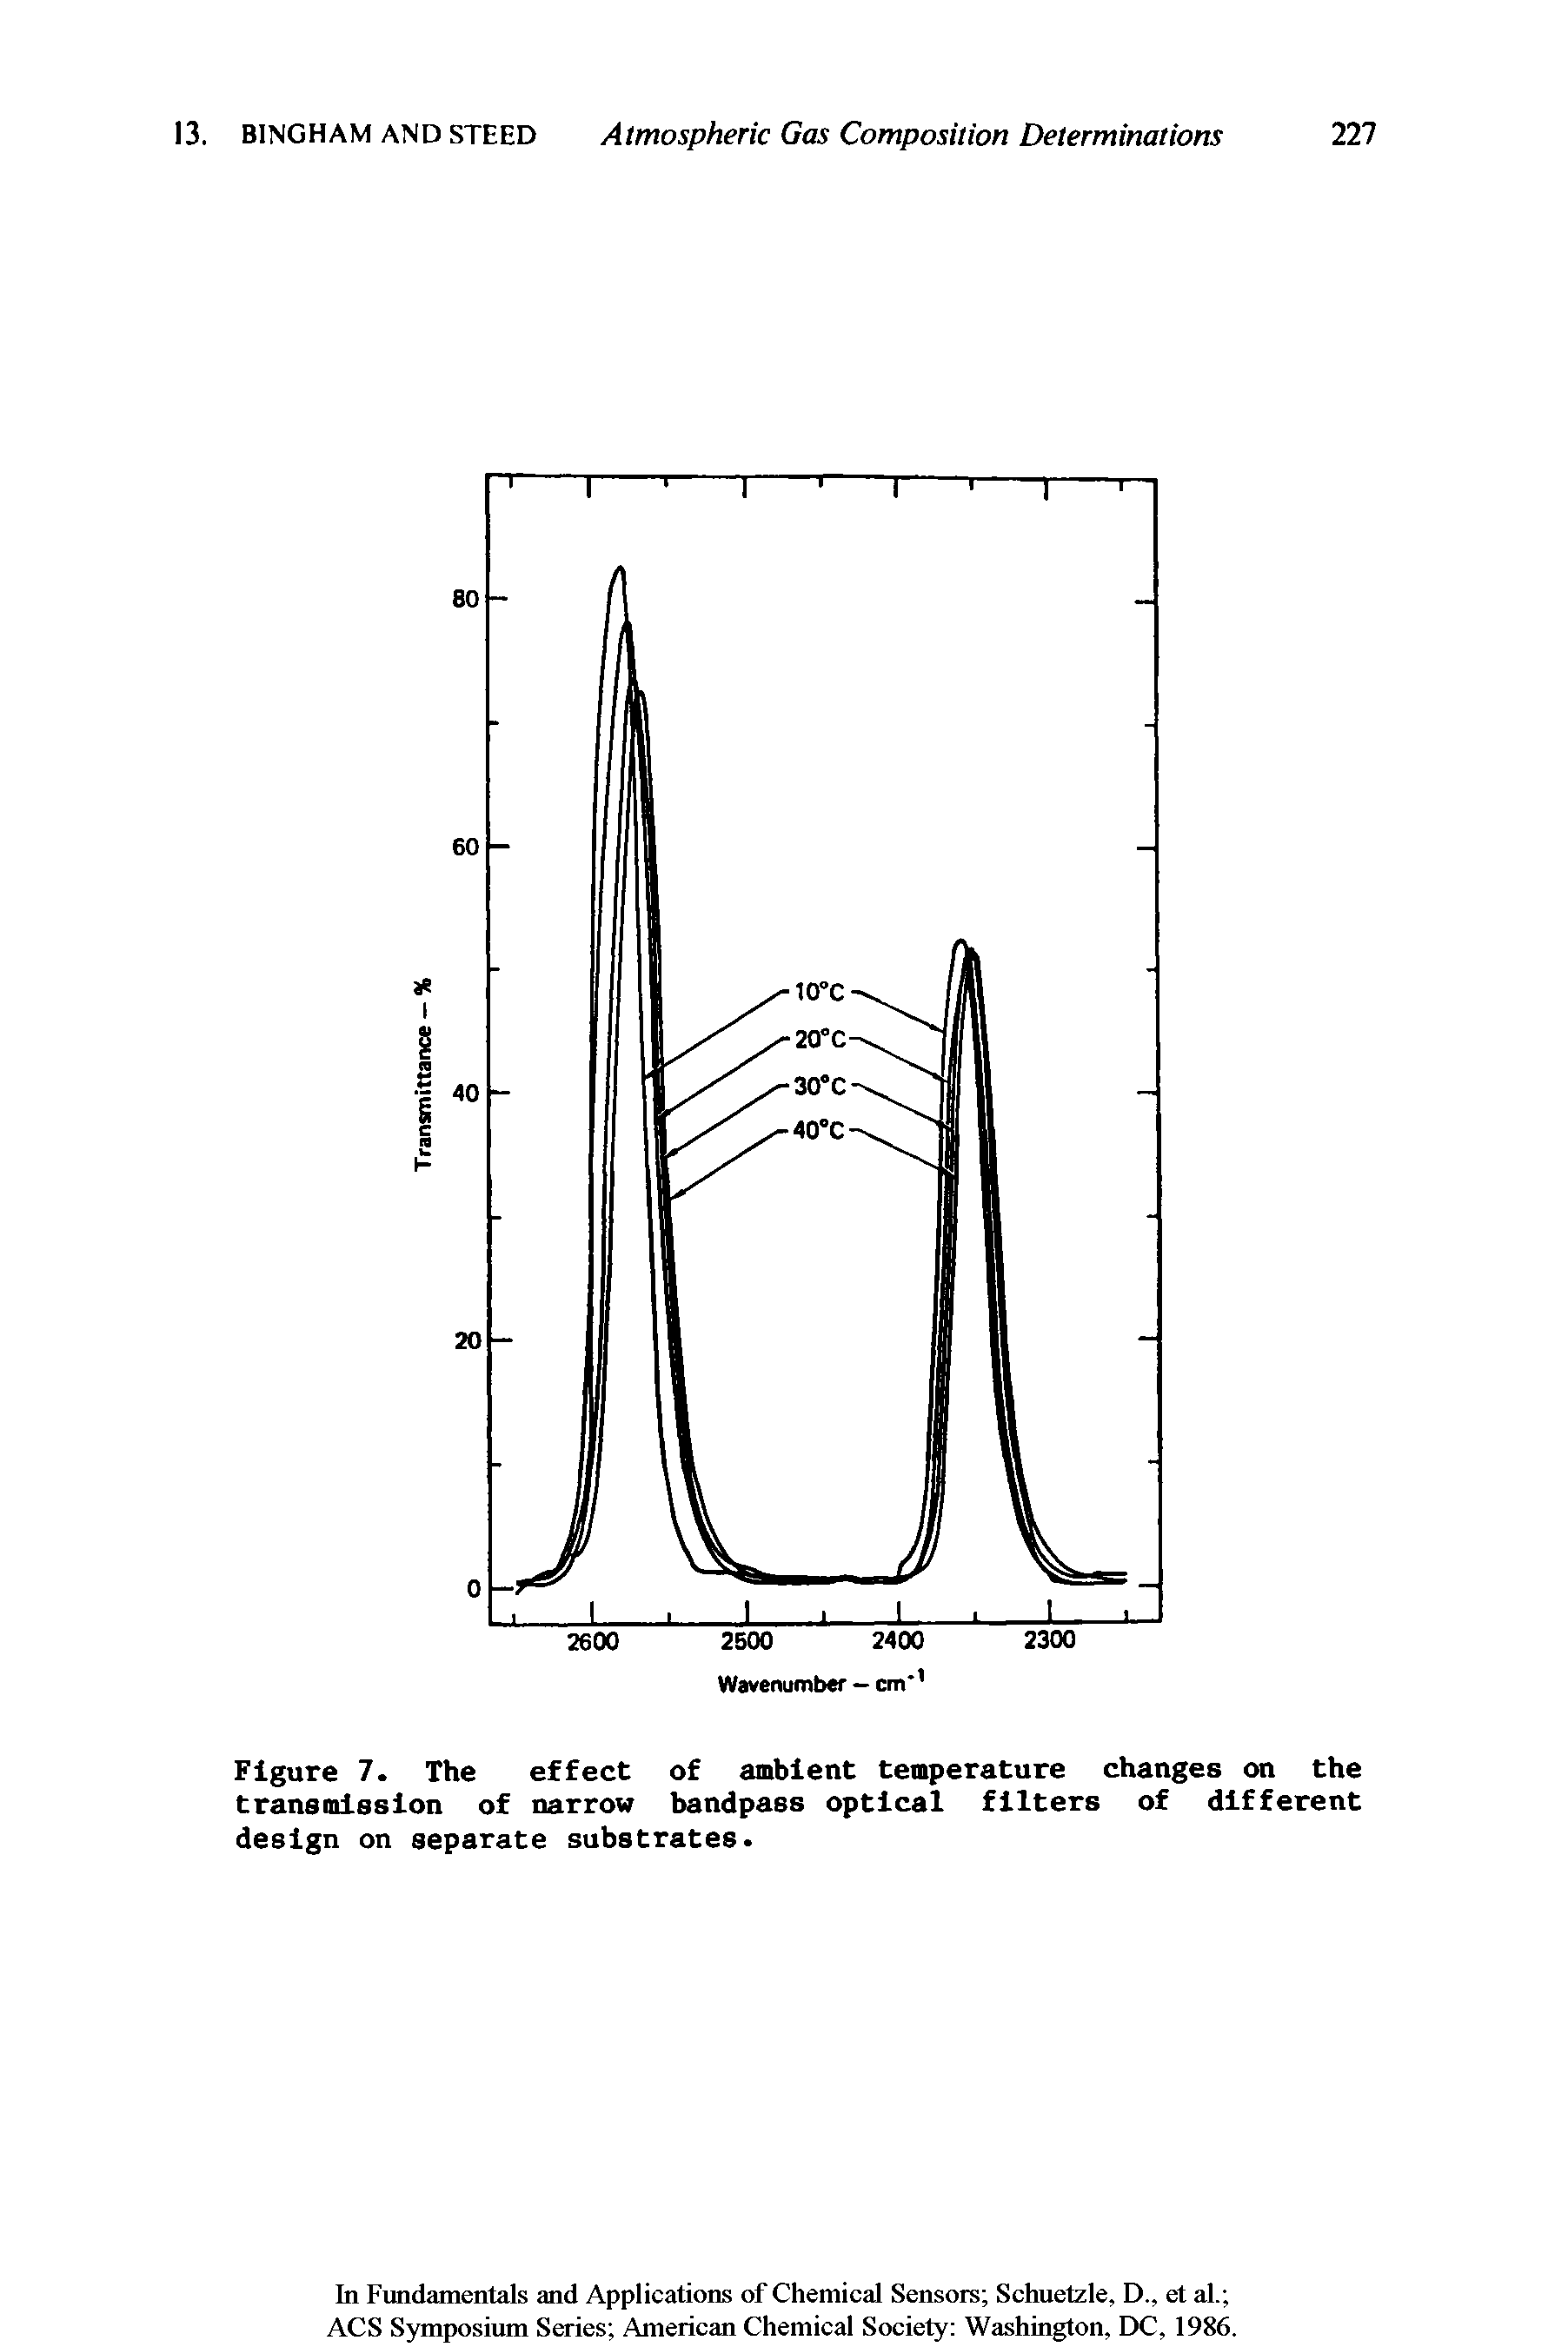 Figure 7. The effect of ambient temperature changes on the transmission of narrow bandpass optical filters of different design on separate substrates.